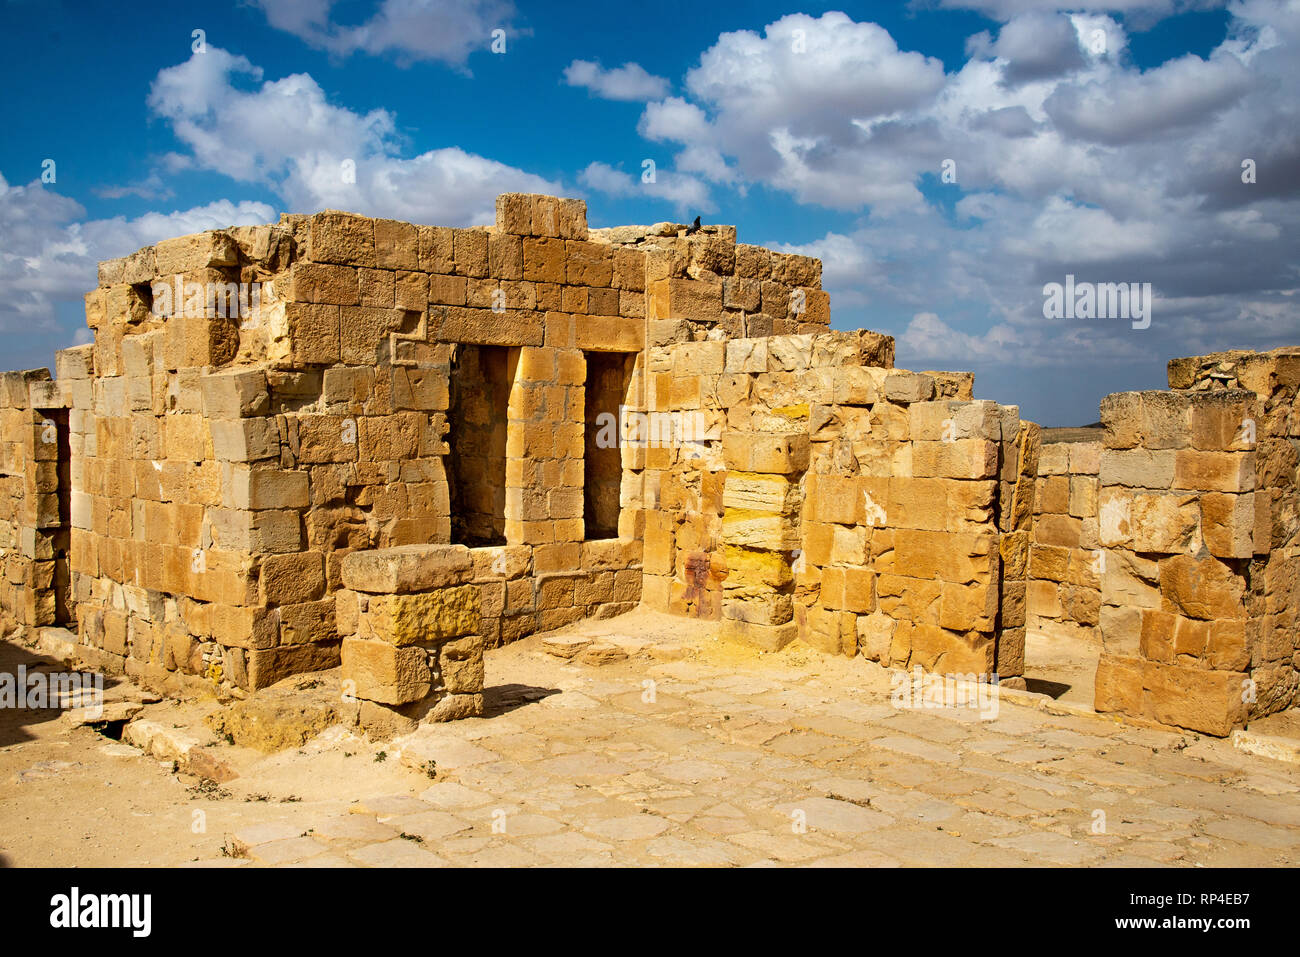 MAMSHIT, ISRAEL / APRIL 10, 2018:  This ancient Christian Nabatean city in Israel's Negev desert was abandoned after the Muslim coquest in the 7th cen Stock Photo